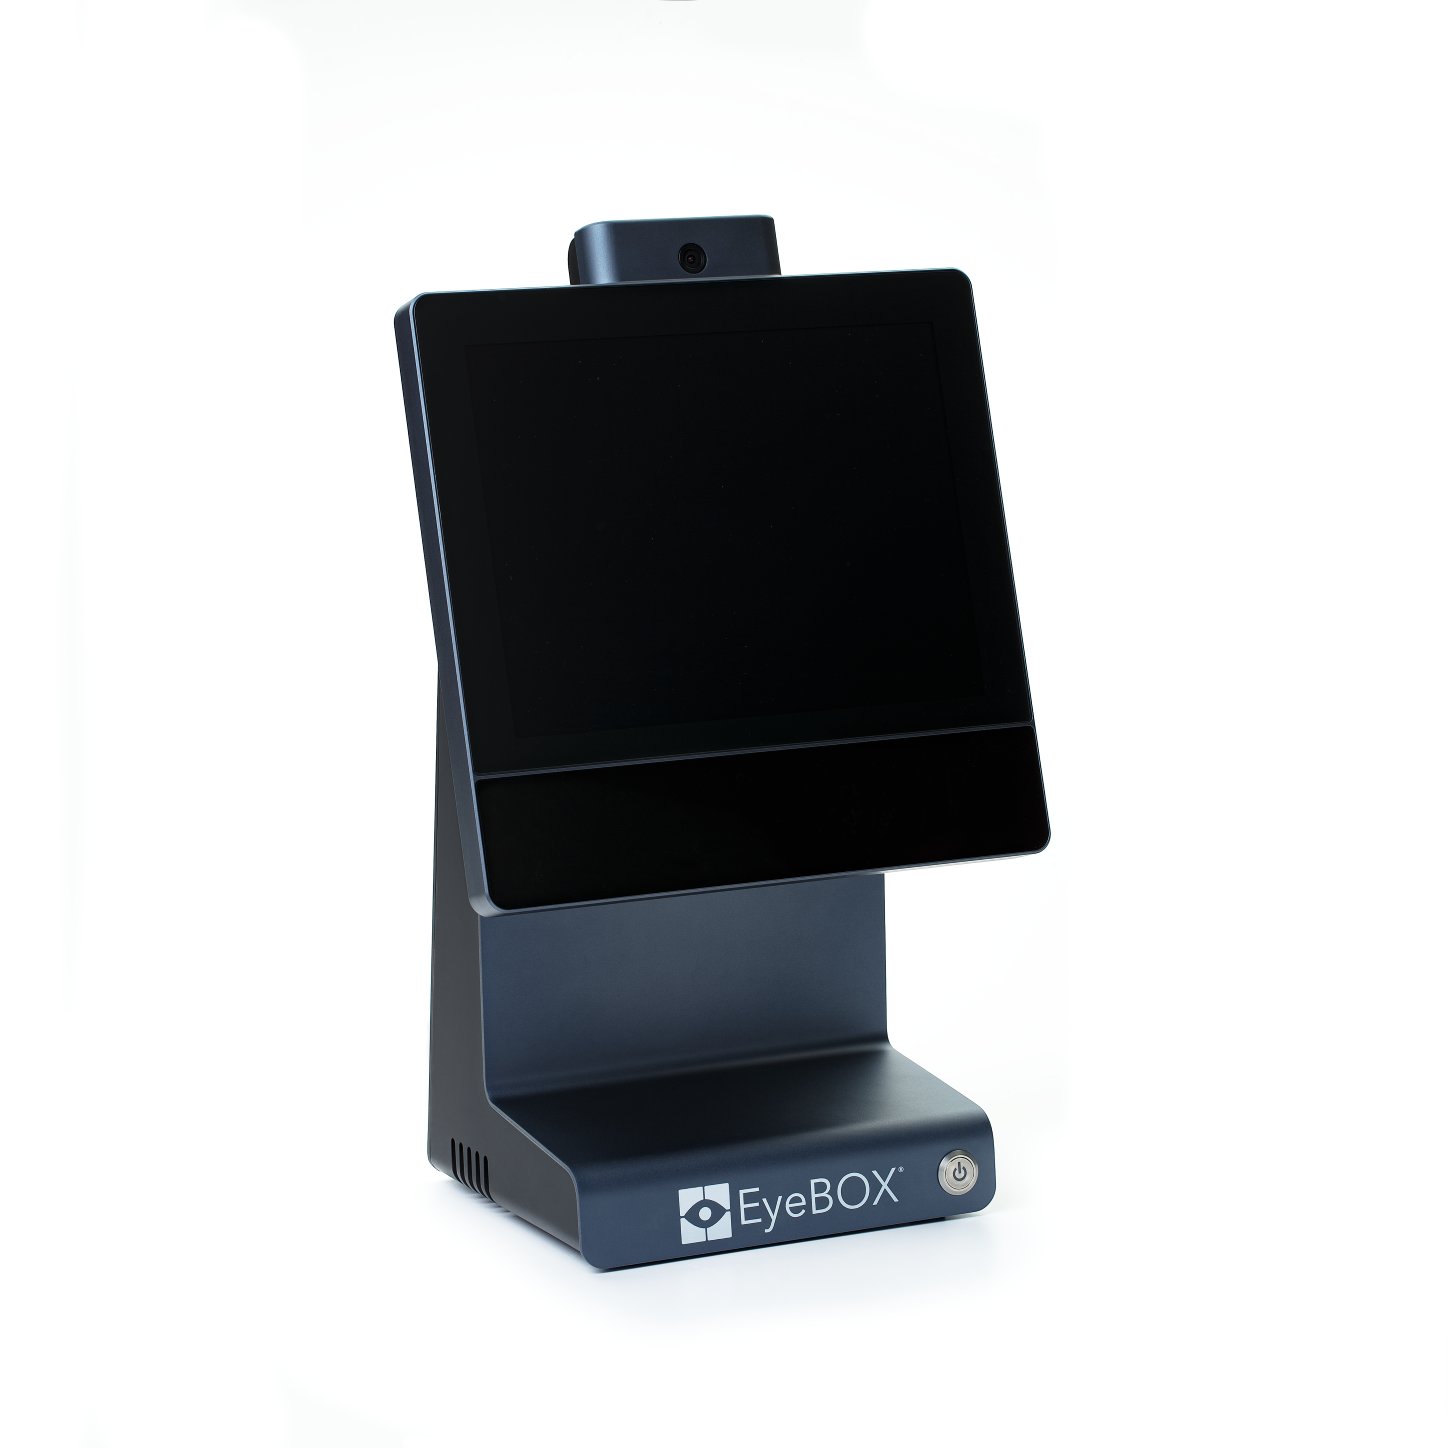 Oculogica’s new EyeBOX model is smaller and lighter and includes an integrated concussion questionnaire.